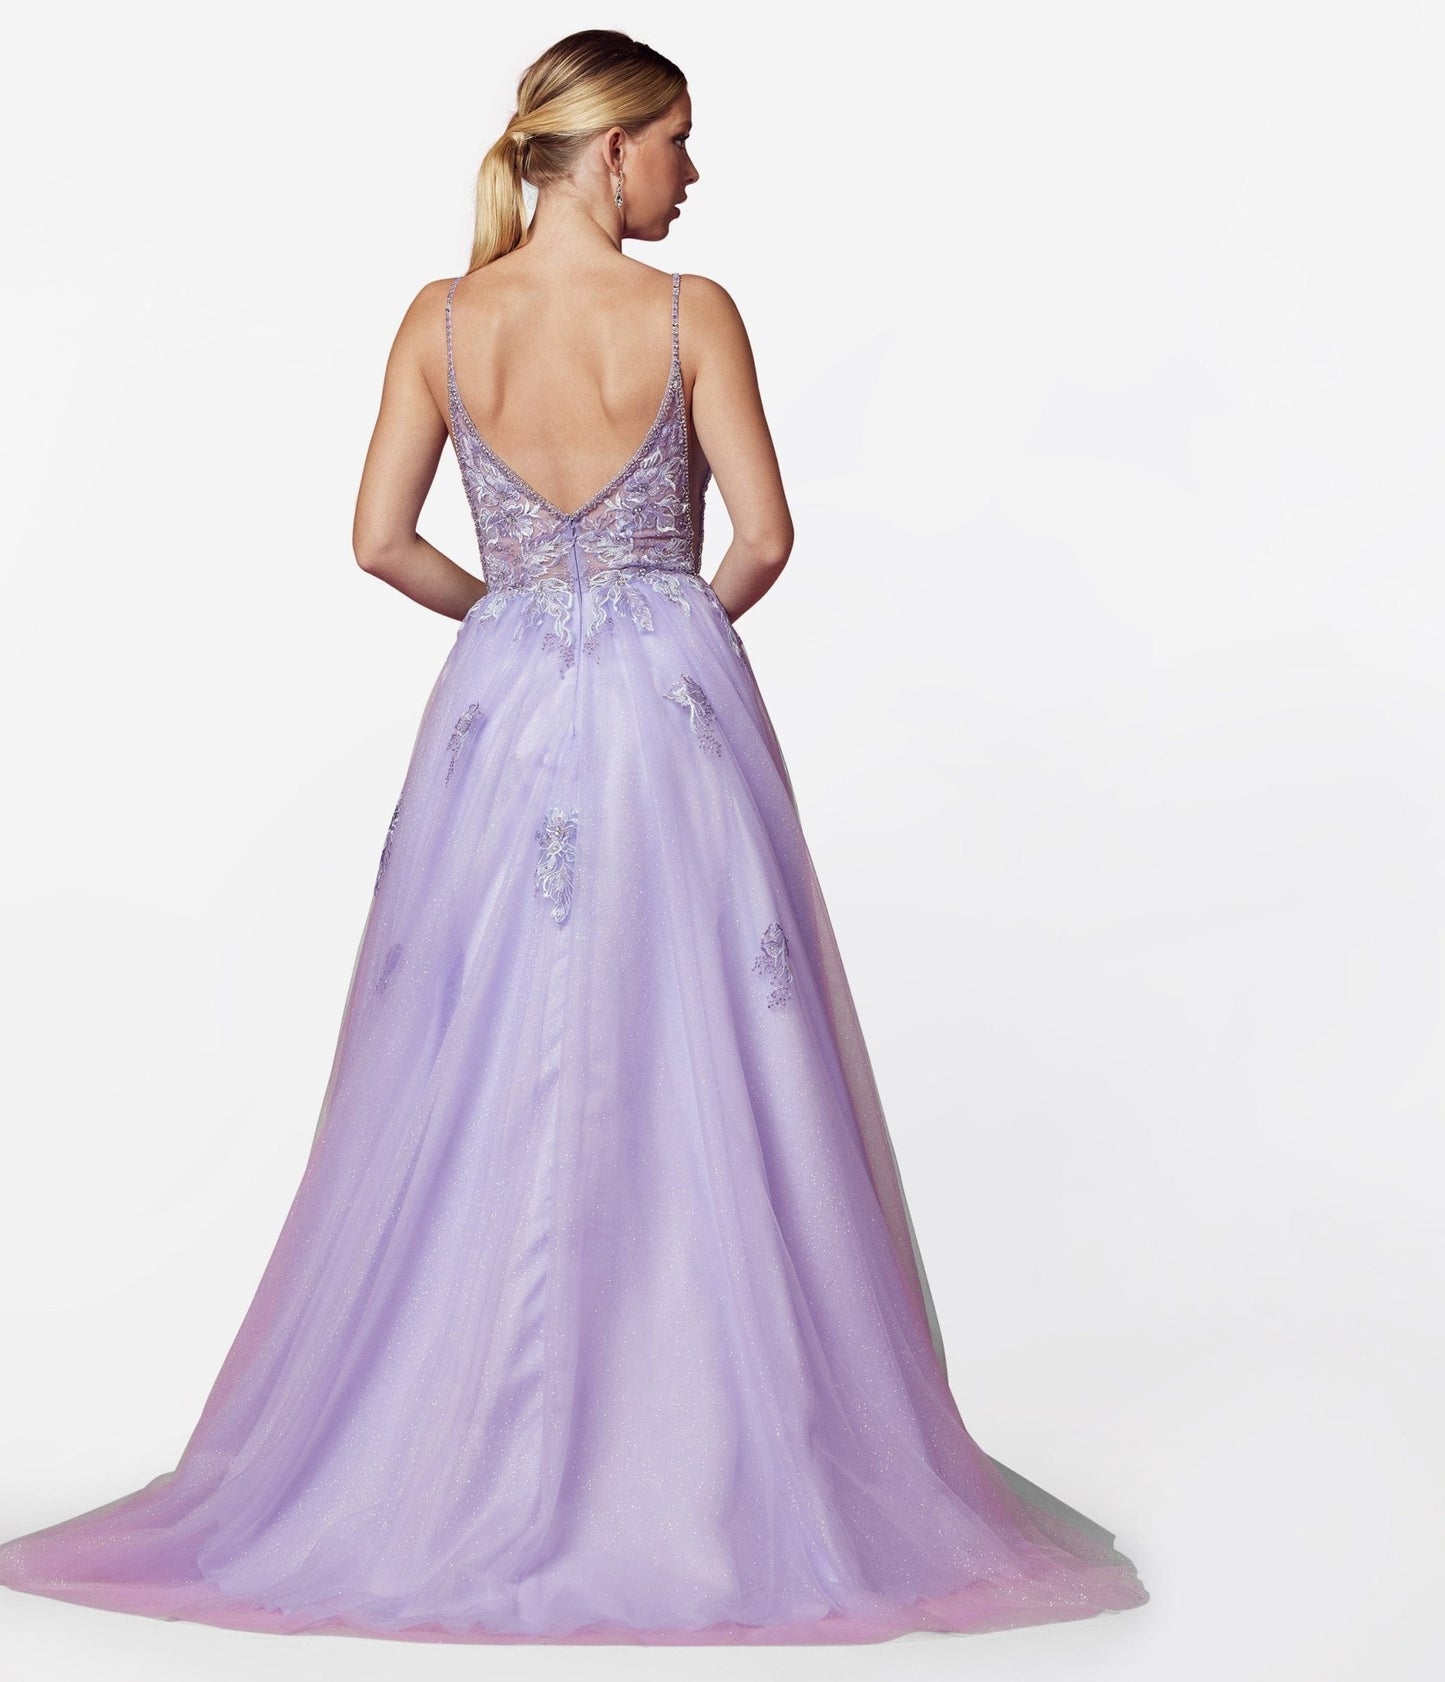 Vintage Lilac Ball Gown Flower Birthday Dress With Sheer Neckline, Tulle  Fabric, Short Sleeves, And Peageant Style ZJ406 2023 Collection From  Chic_cheap, $78.4